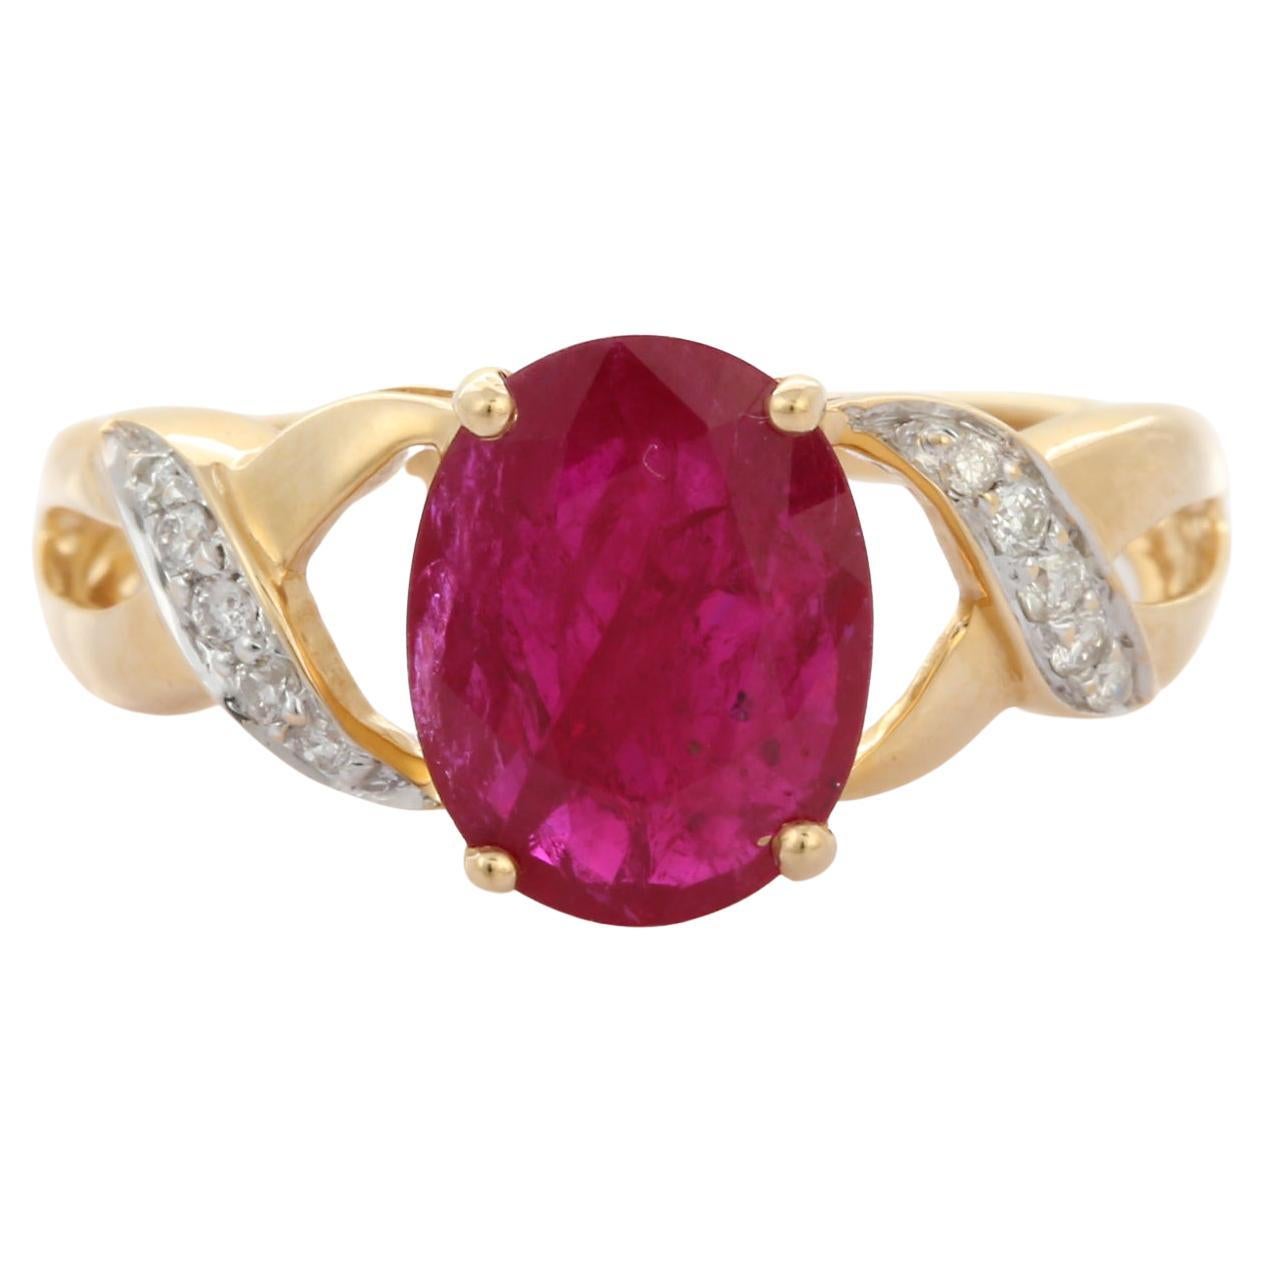 For Sale:  2.28 Carat Ruby Side Wave Diamond Engagement Ring in 18K Yellow Gold